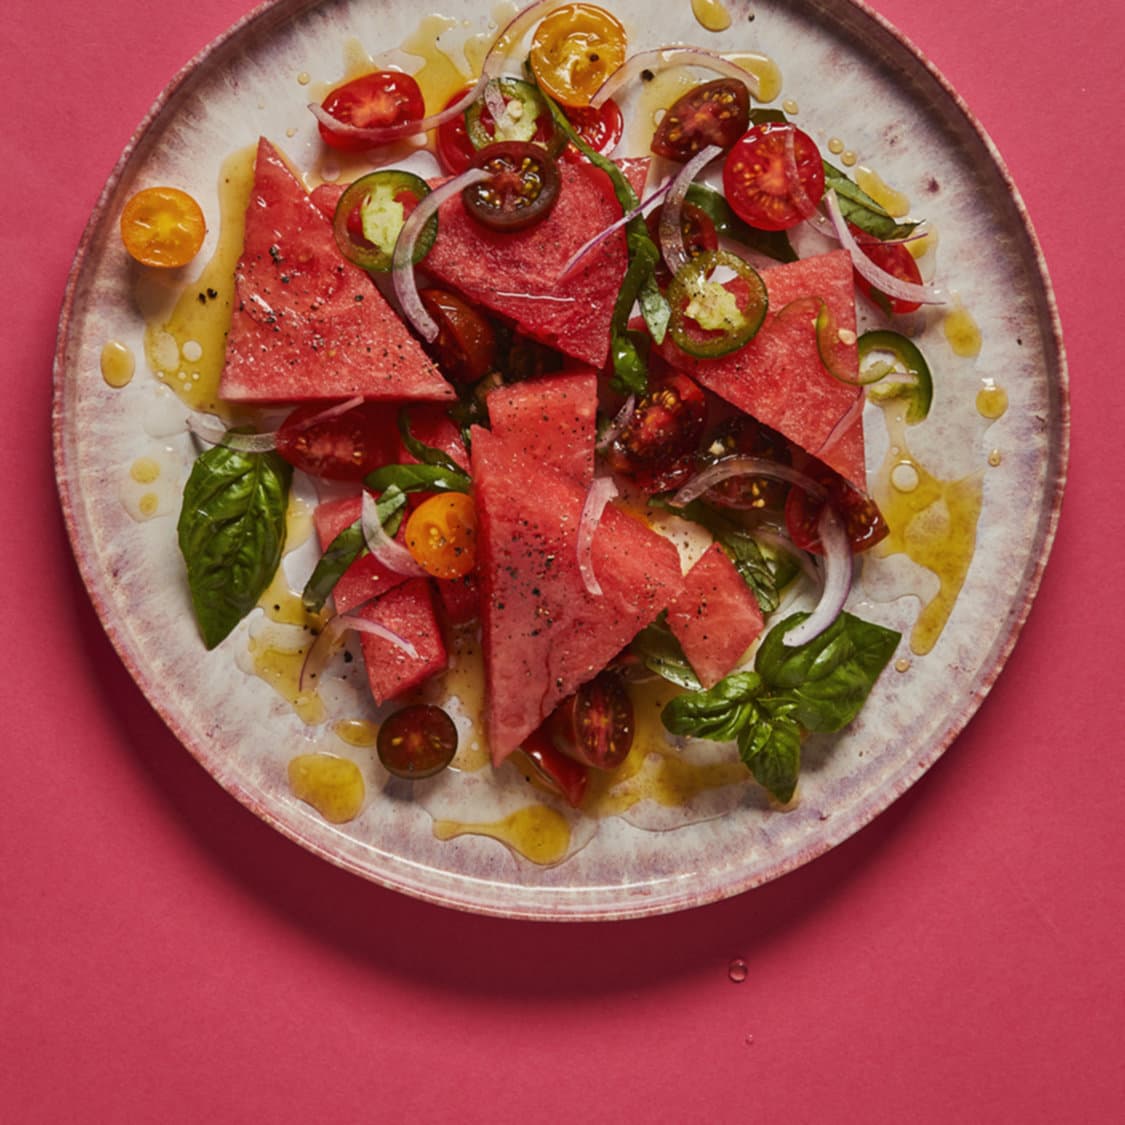 https://fleishigs.com/images/mobile-app/recipes/562-list-tomato-and-watermelon-salad-with-spicy-vinaigrette.jpg